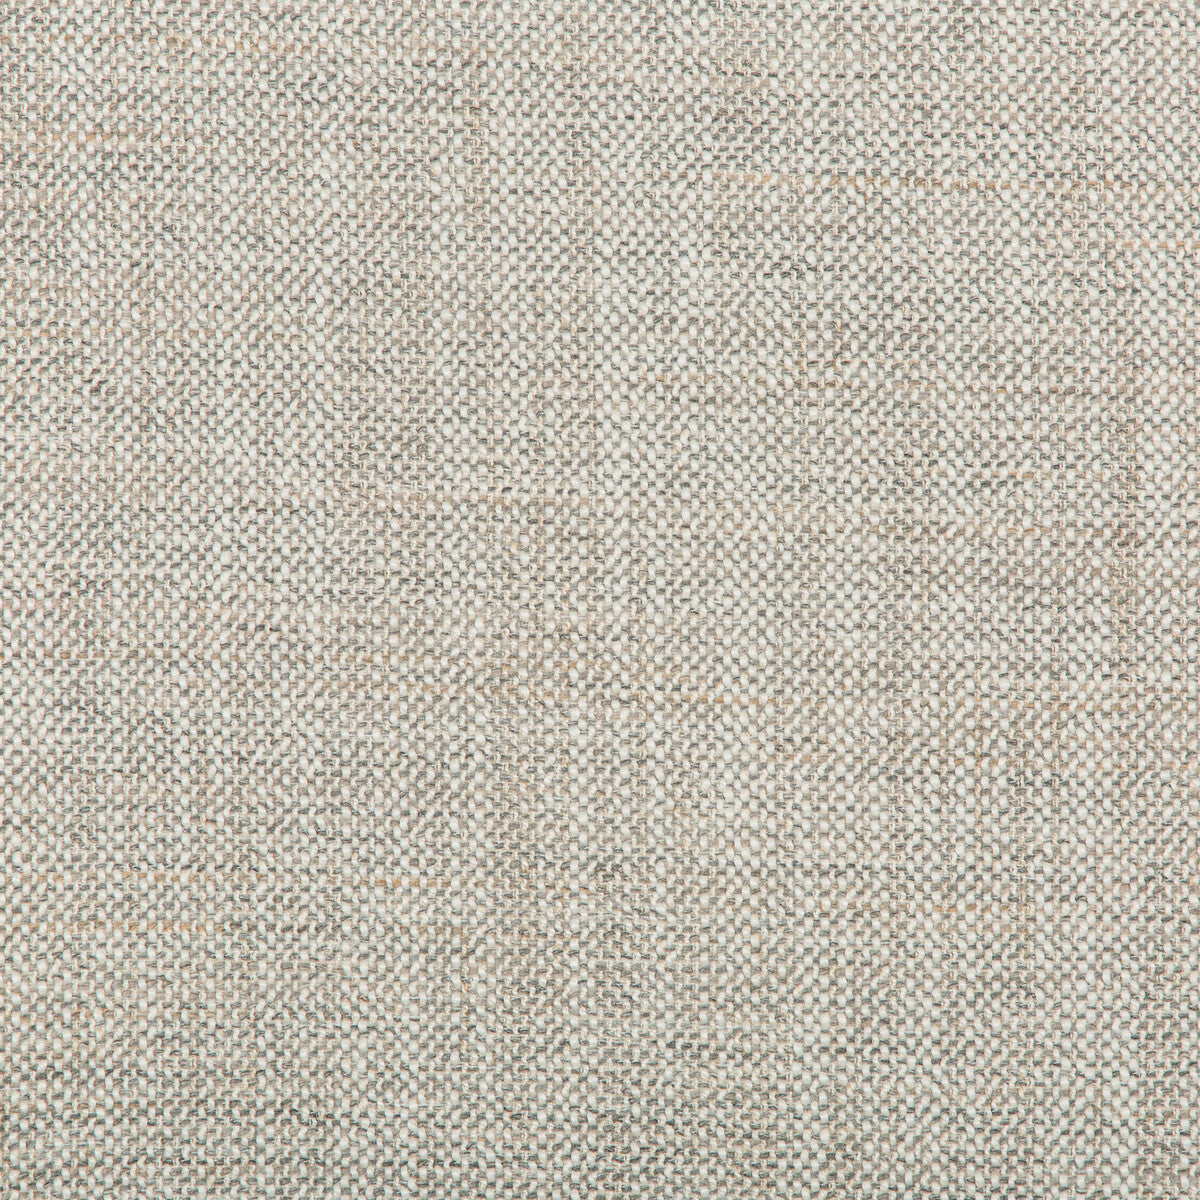 Tonquin fabric in cloud color - pattern 35559.11.0 - by Kravet Couture in the Modern Colors-Sojourn Collection collection